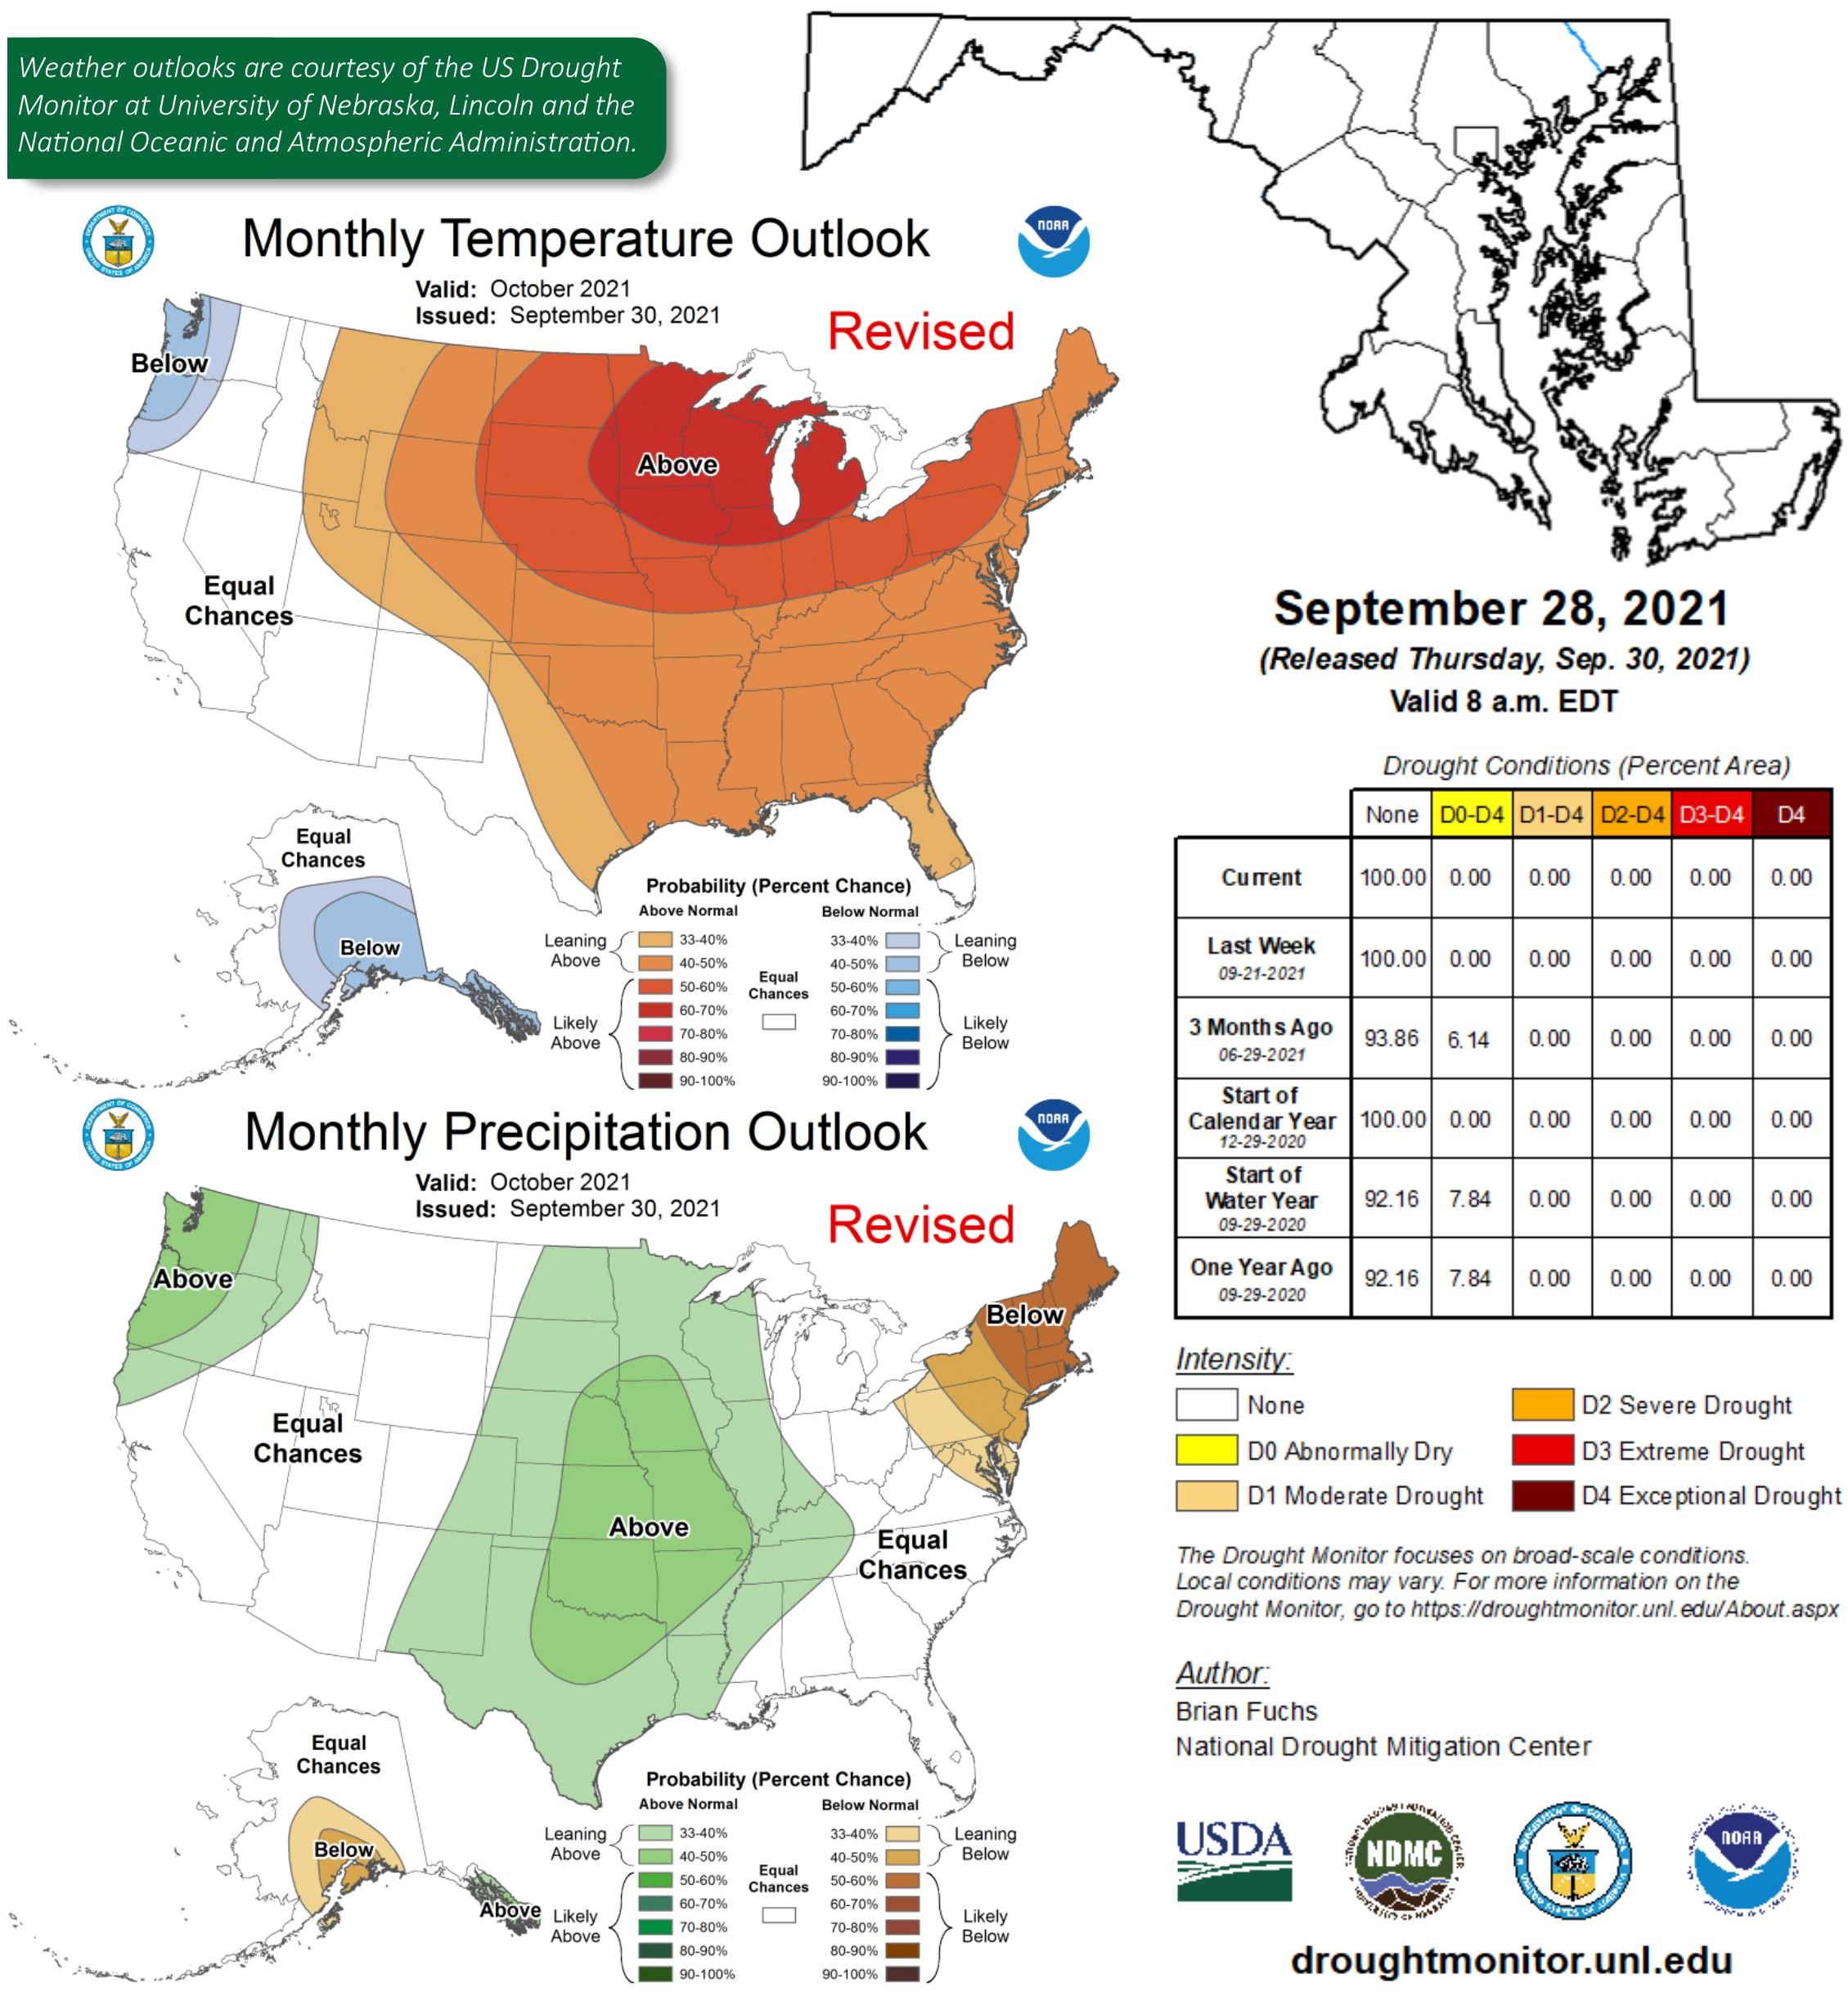 Maps and graph on Maryland drought forecast conditions for the month of October